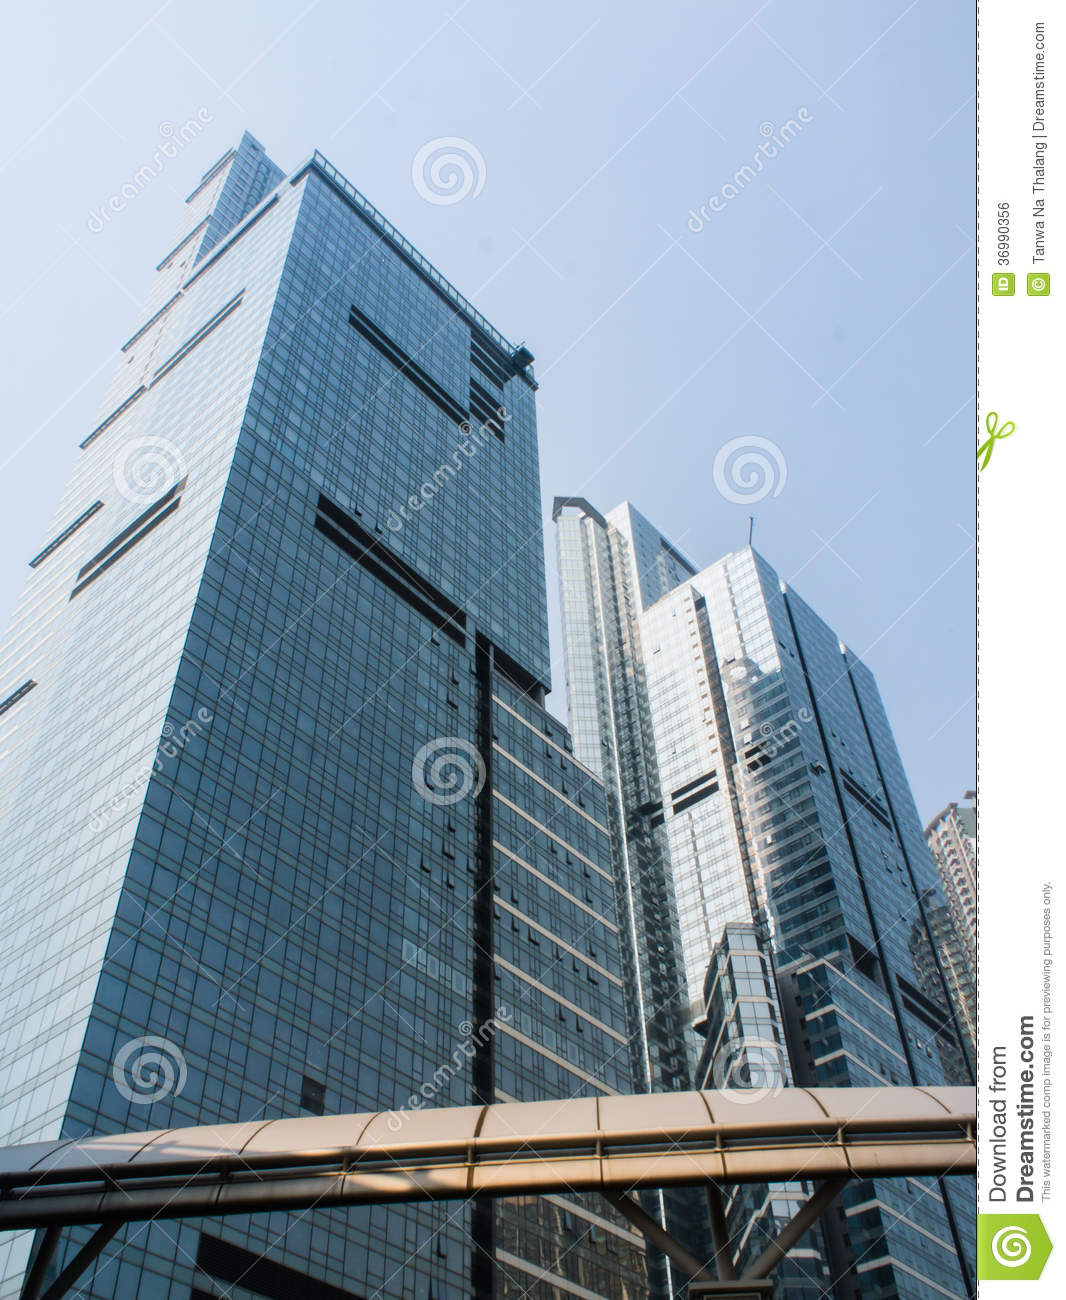 High-Rise Office Building Architecture